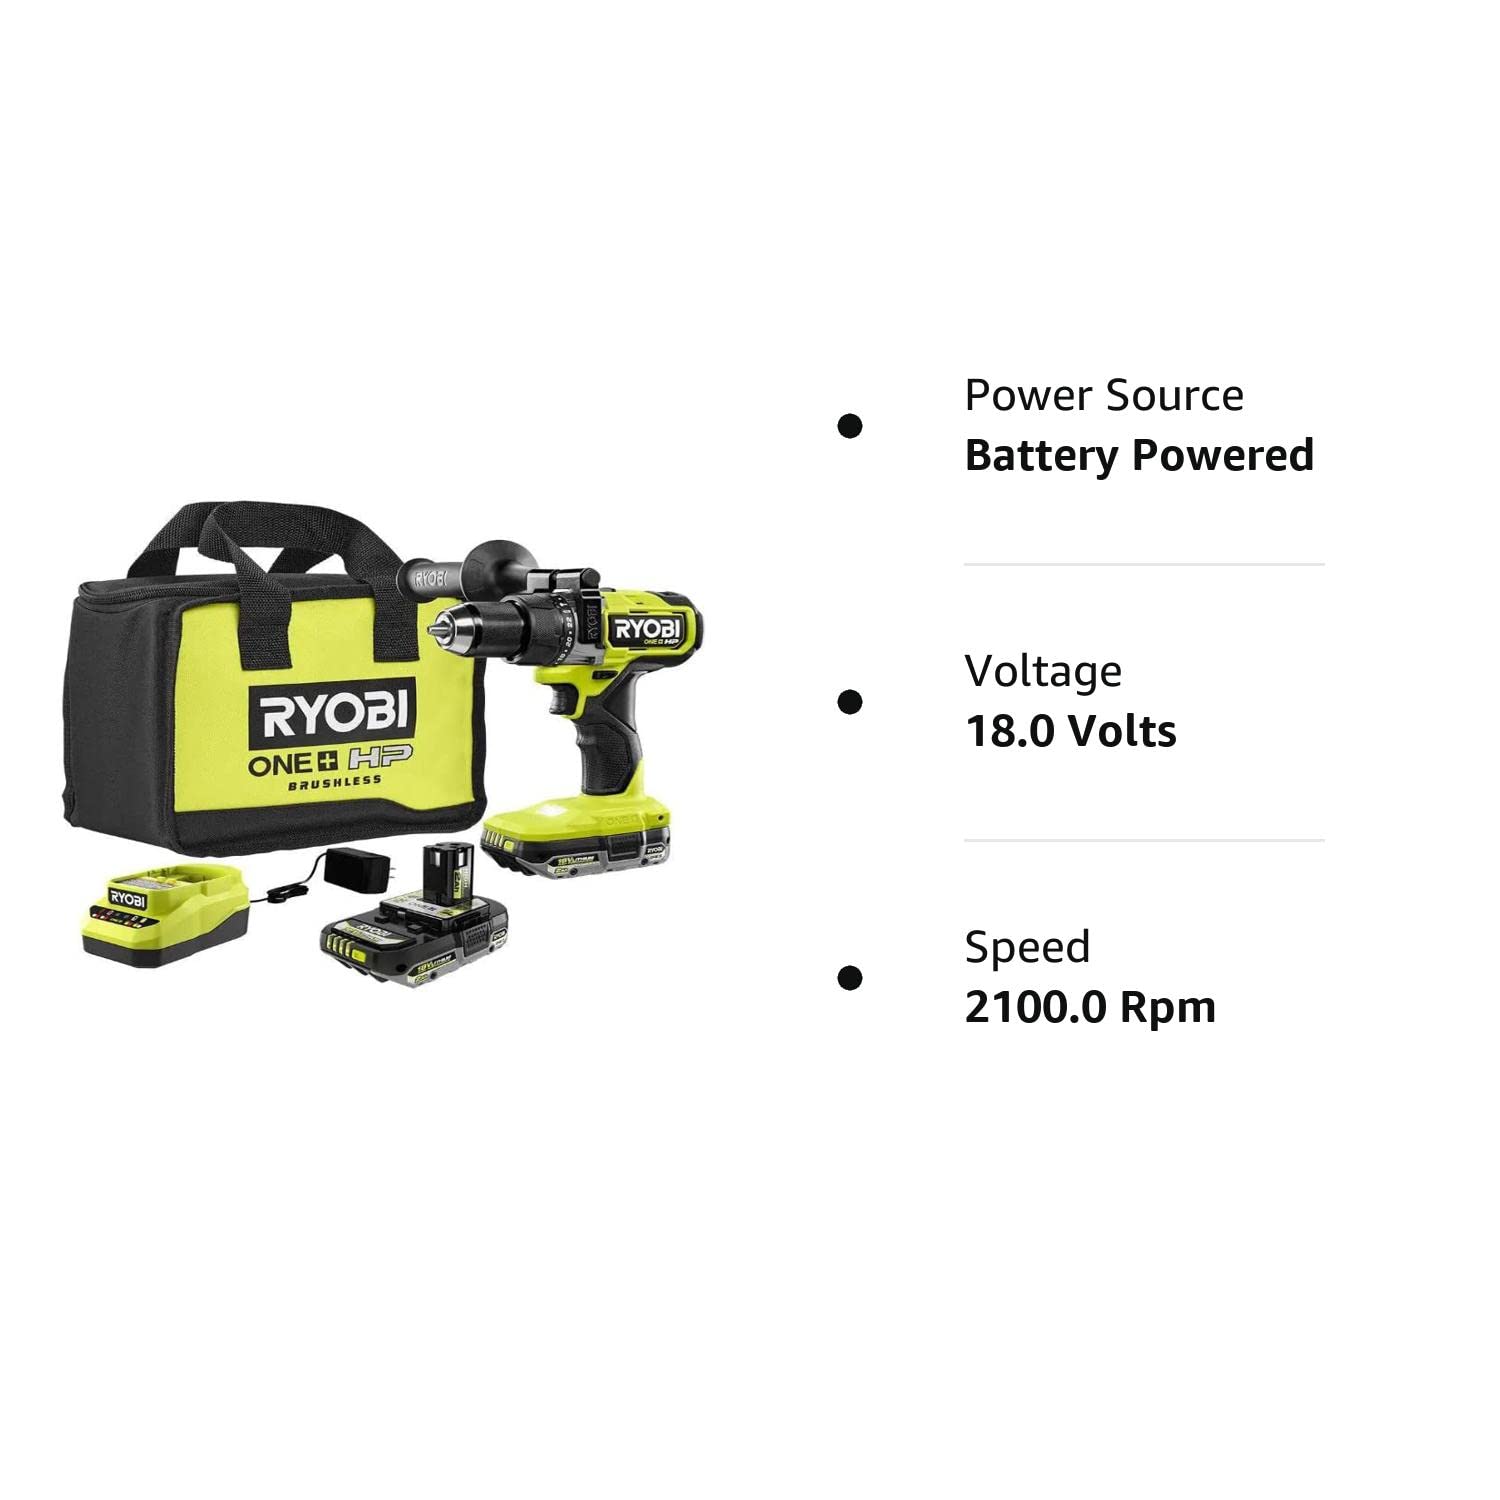 RYOBI ONE+ HP 18V Brushless Cordless 1/2 in. Hammer Drill Kit with (2) 2.0 Ah Batteries, Charger, and Bag (PBLHM101K2)